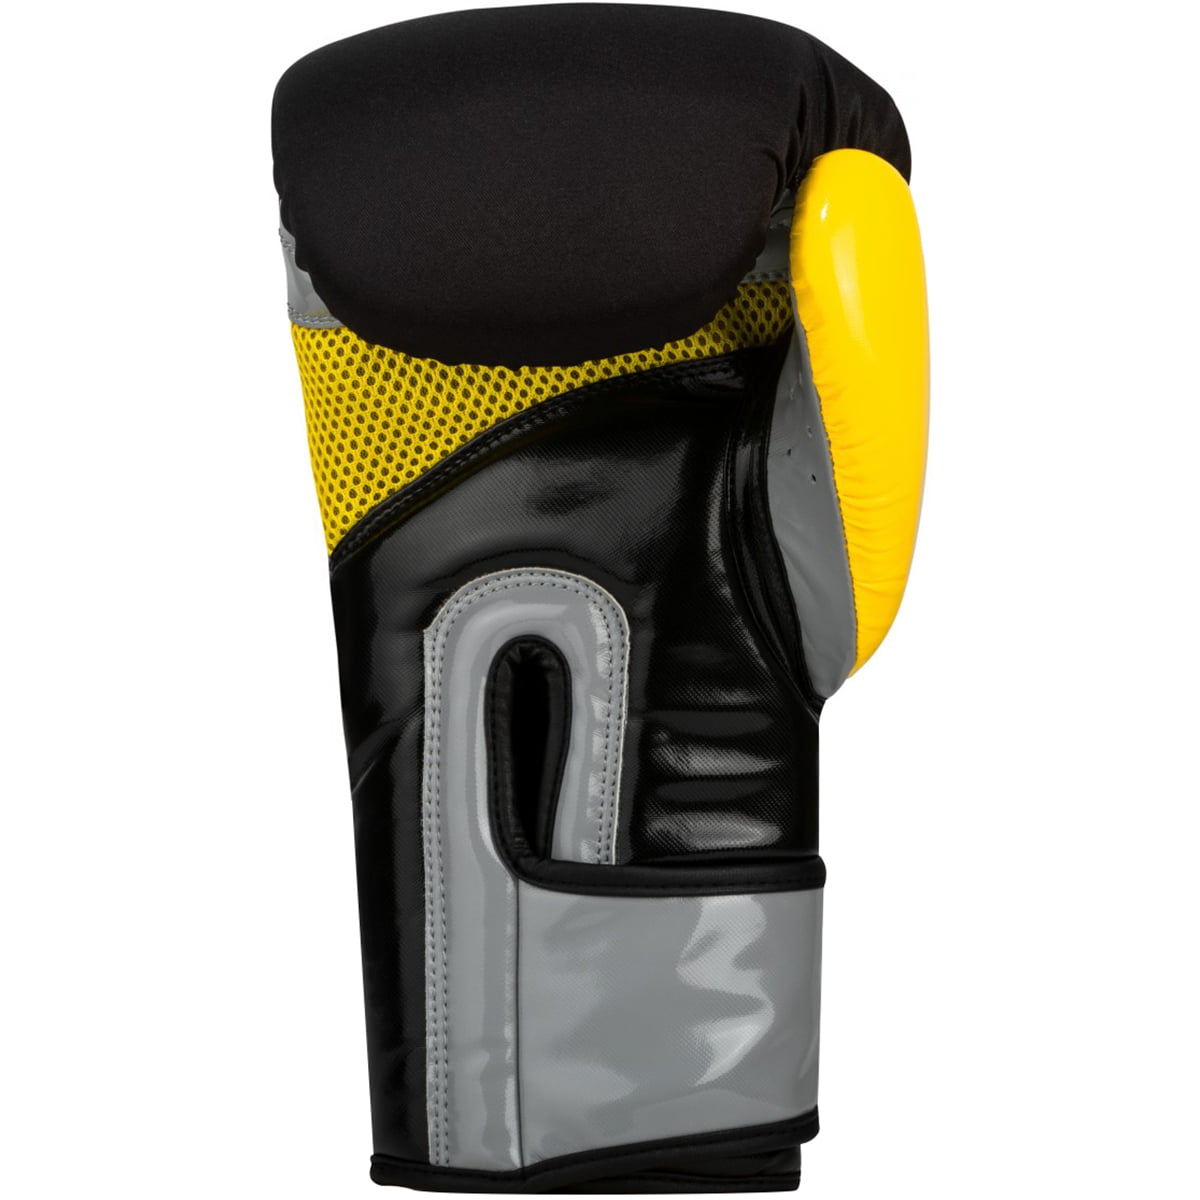 Crusader Title Boxing Infused Foam Training Boxing Gloves 